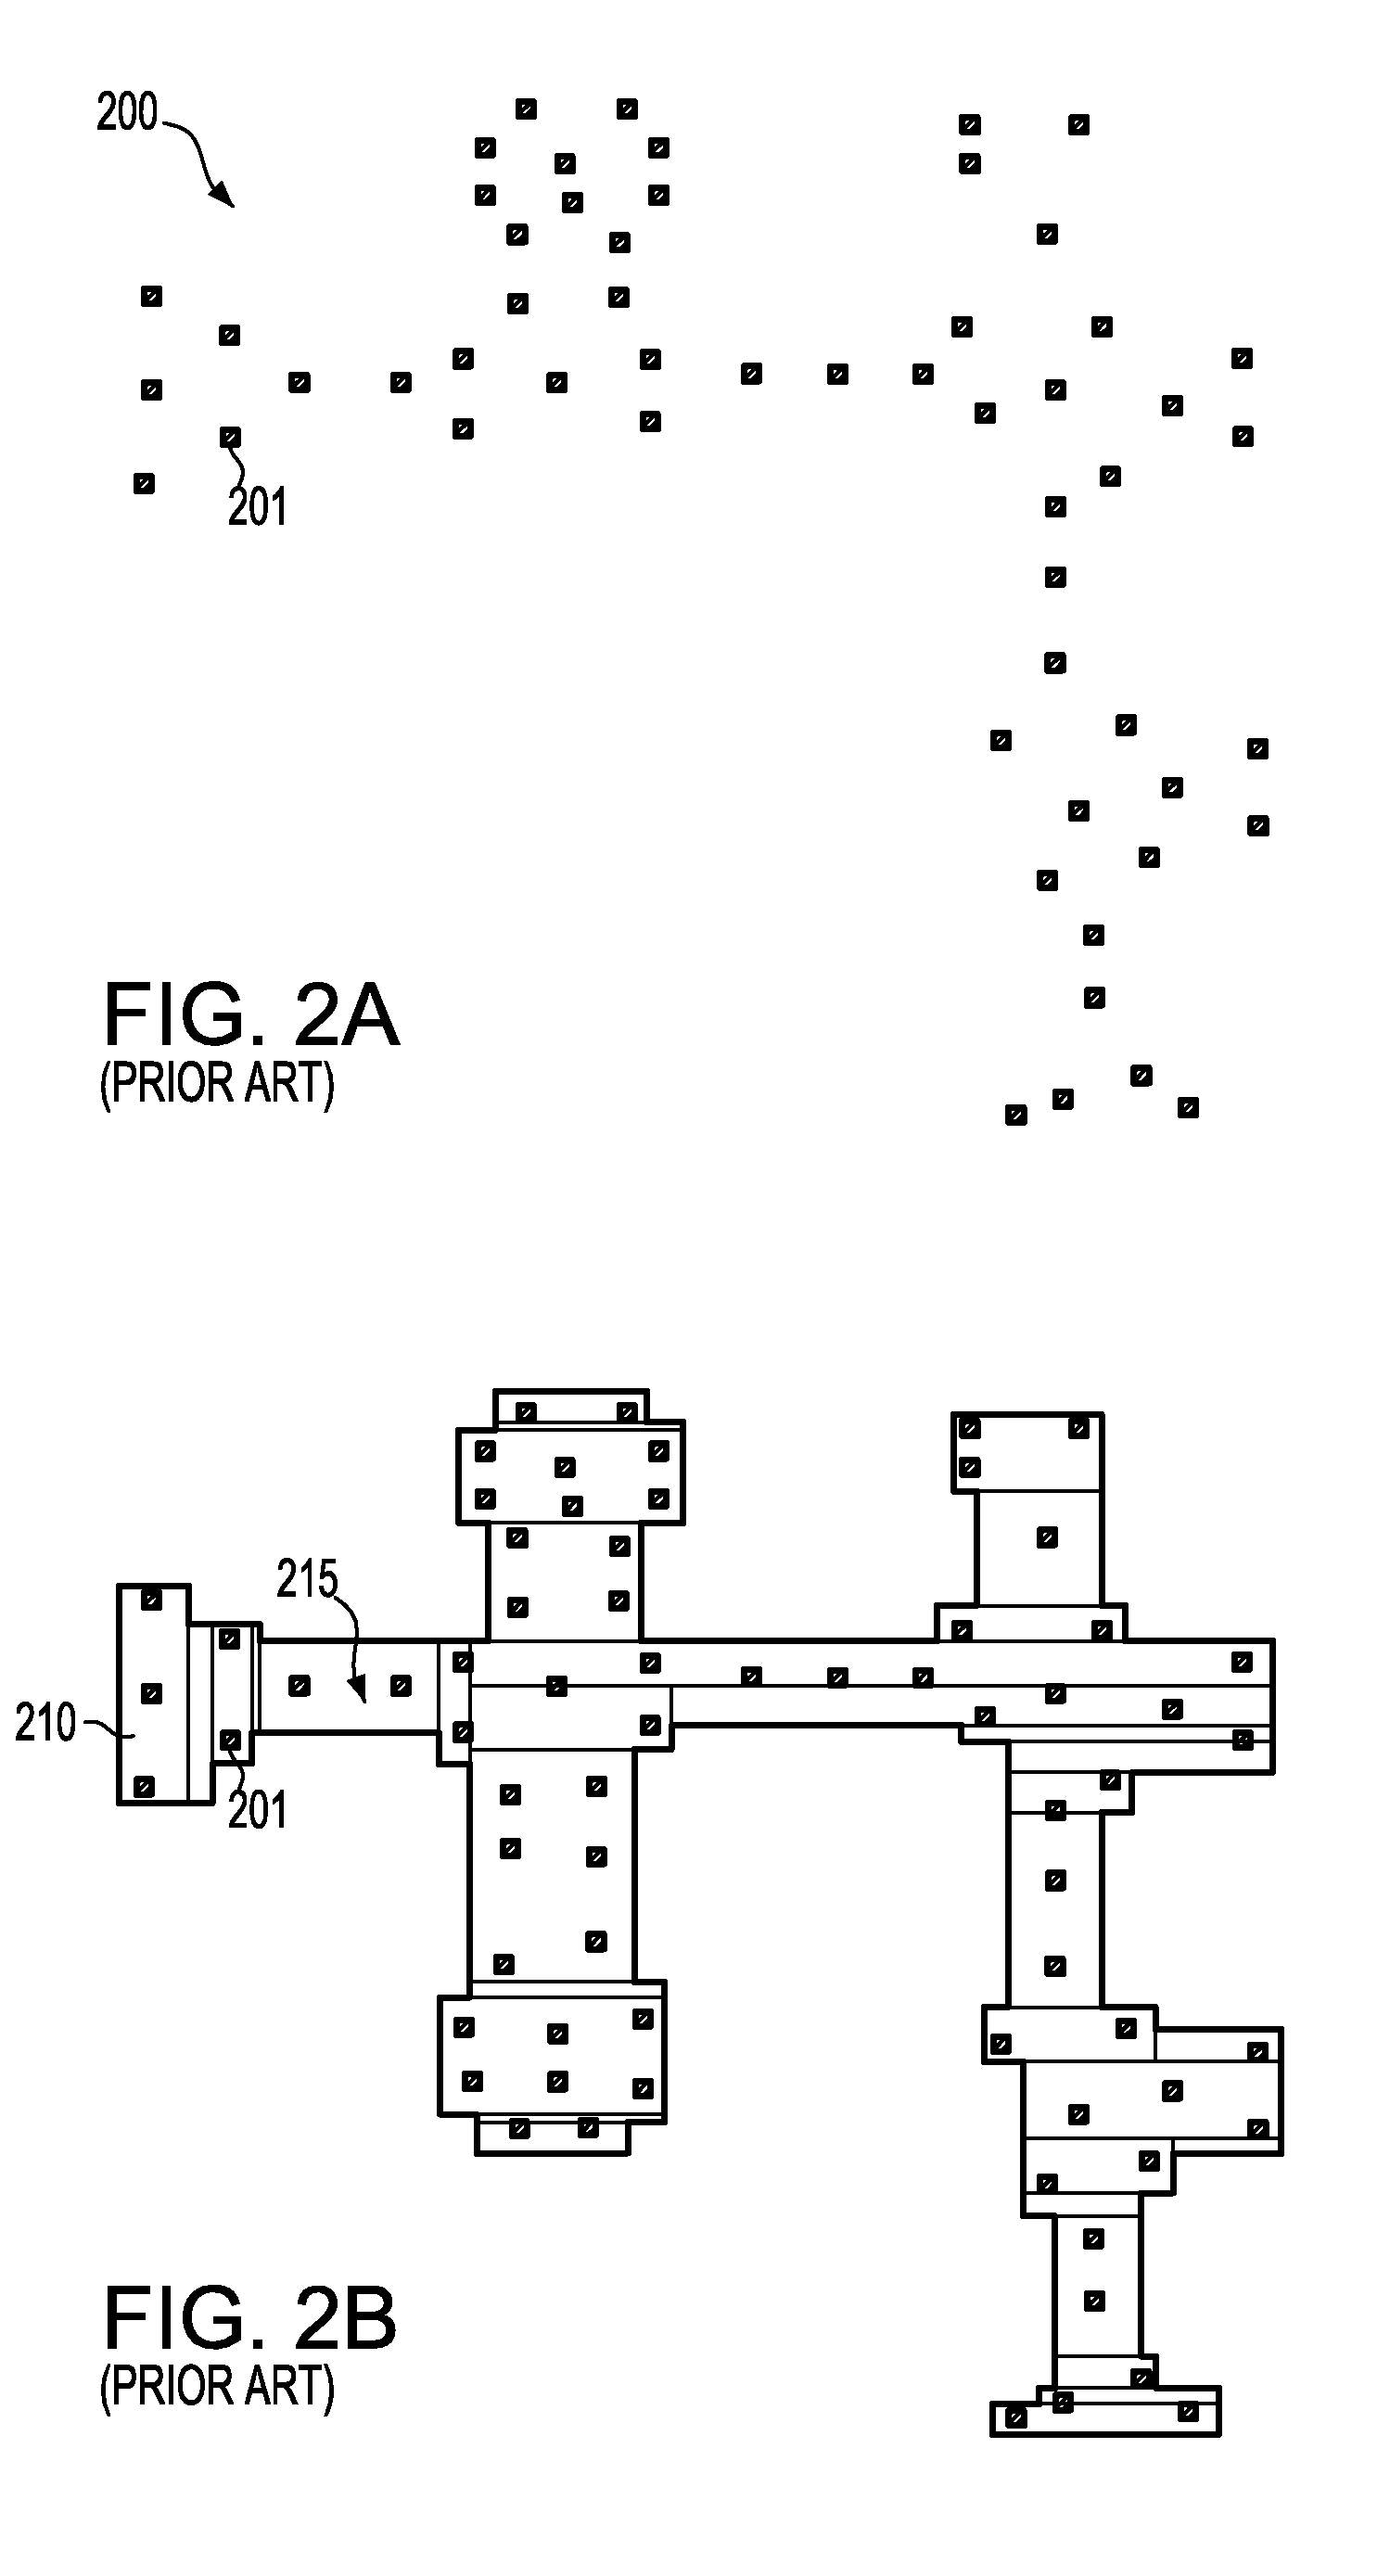 Rectilinear covering method with bounded number of rectangles for designing a VLSI chip